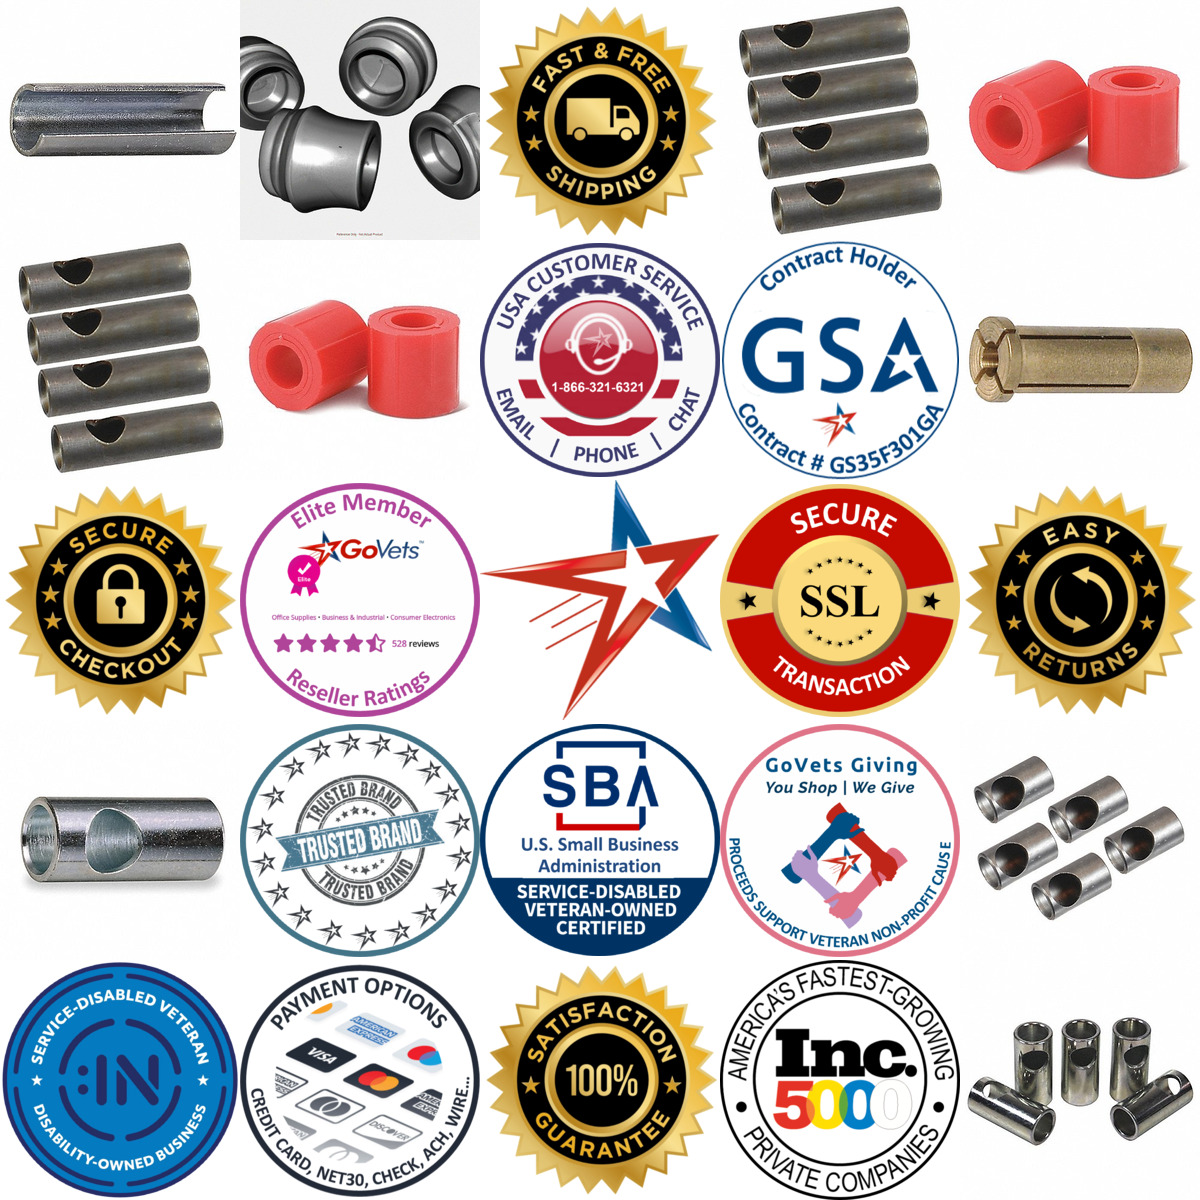 A selection of Reducing Bushings products on GoVets